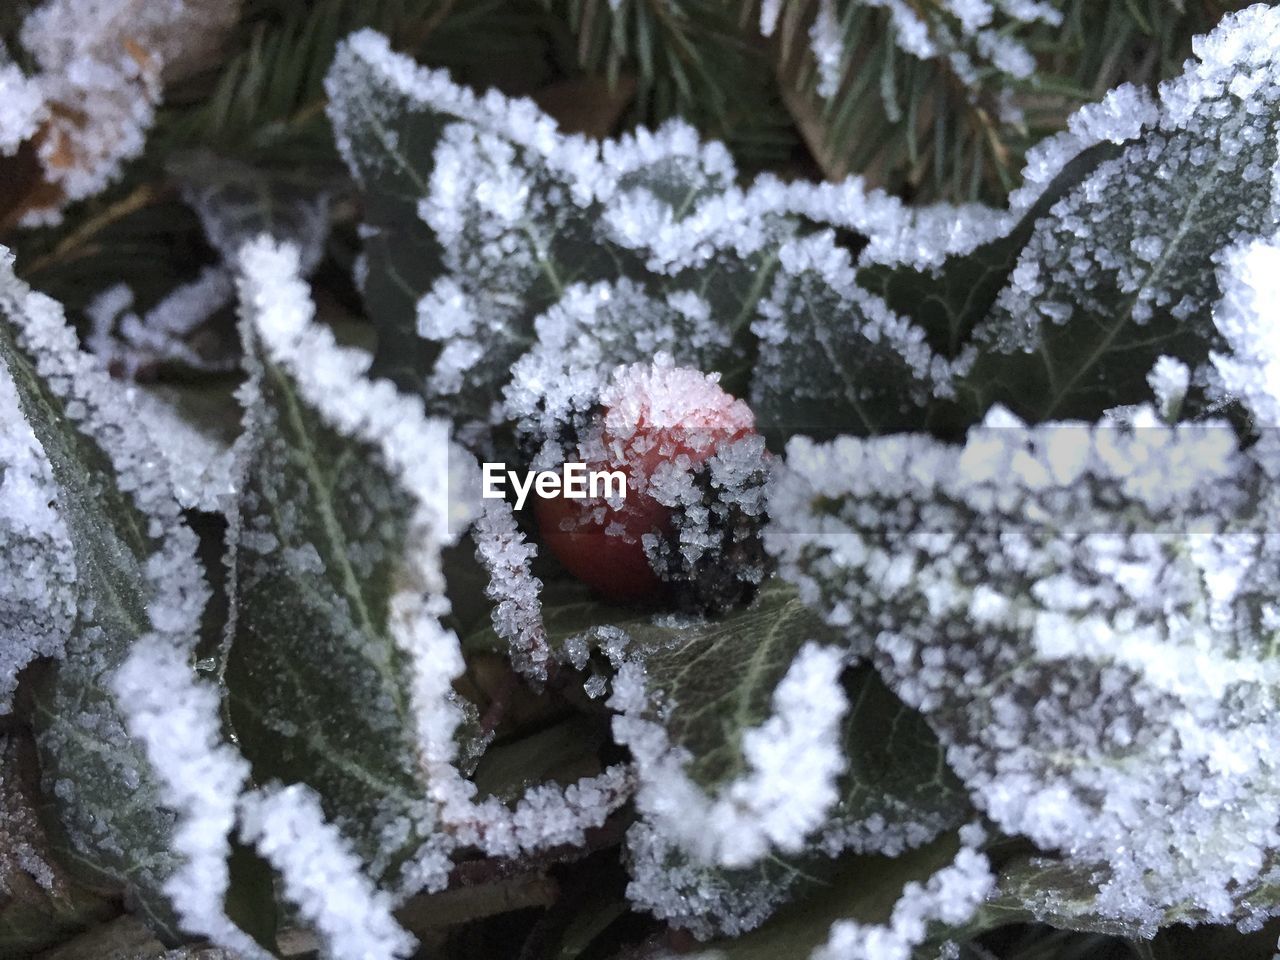 CLOSE-UP OF SNOW COVERED PLANTS IN WINTER